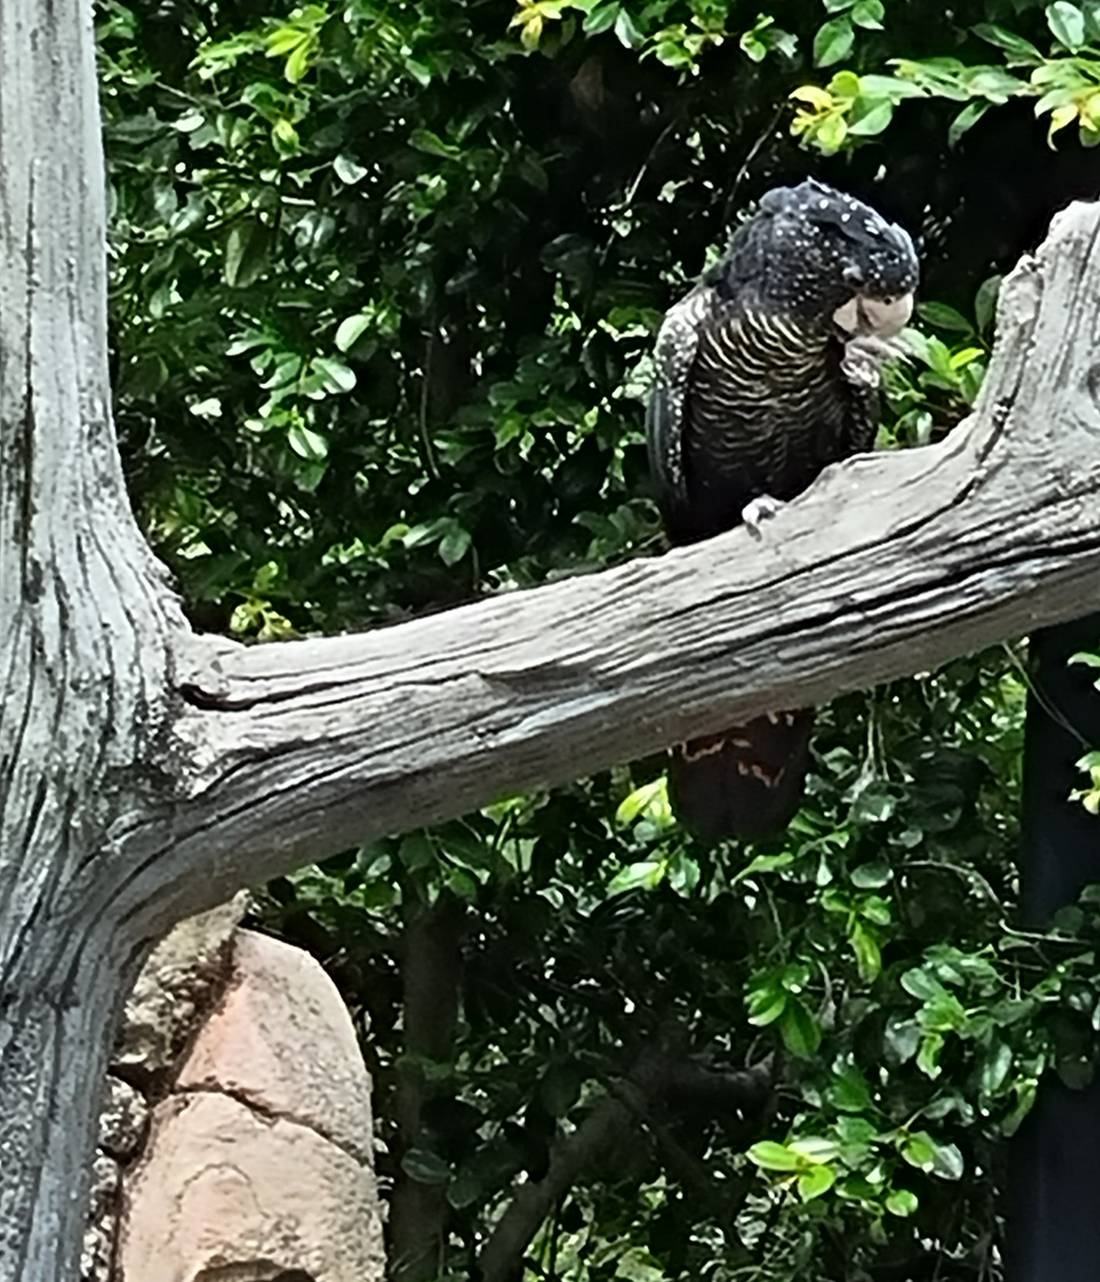 Red Tailed Black Cockatoo. It was happily nibbling away on whatever the handler had just fed it.